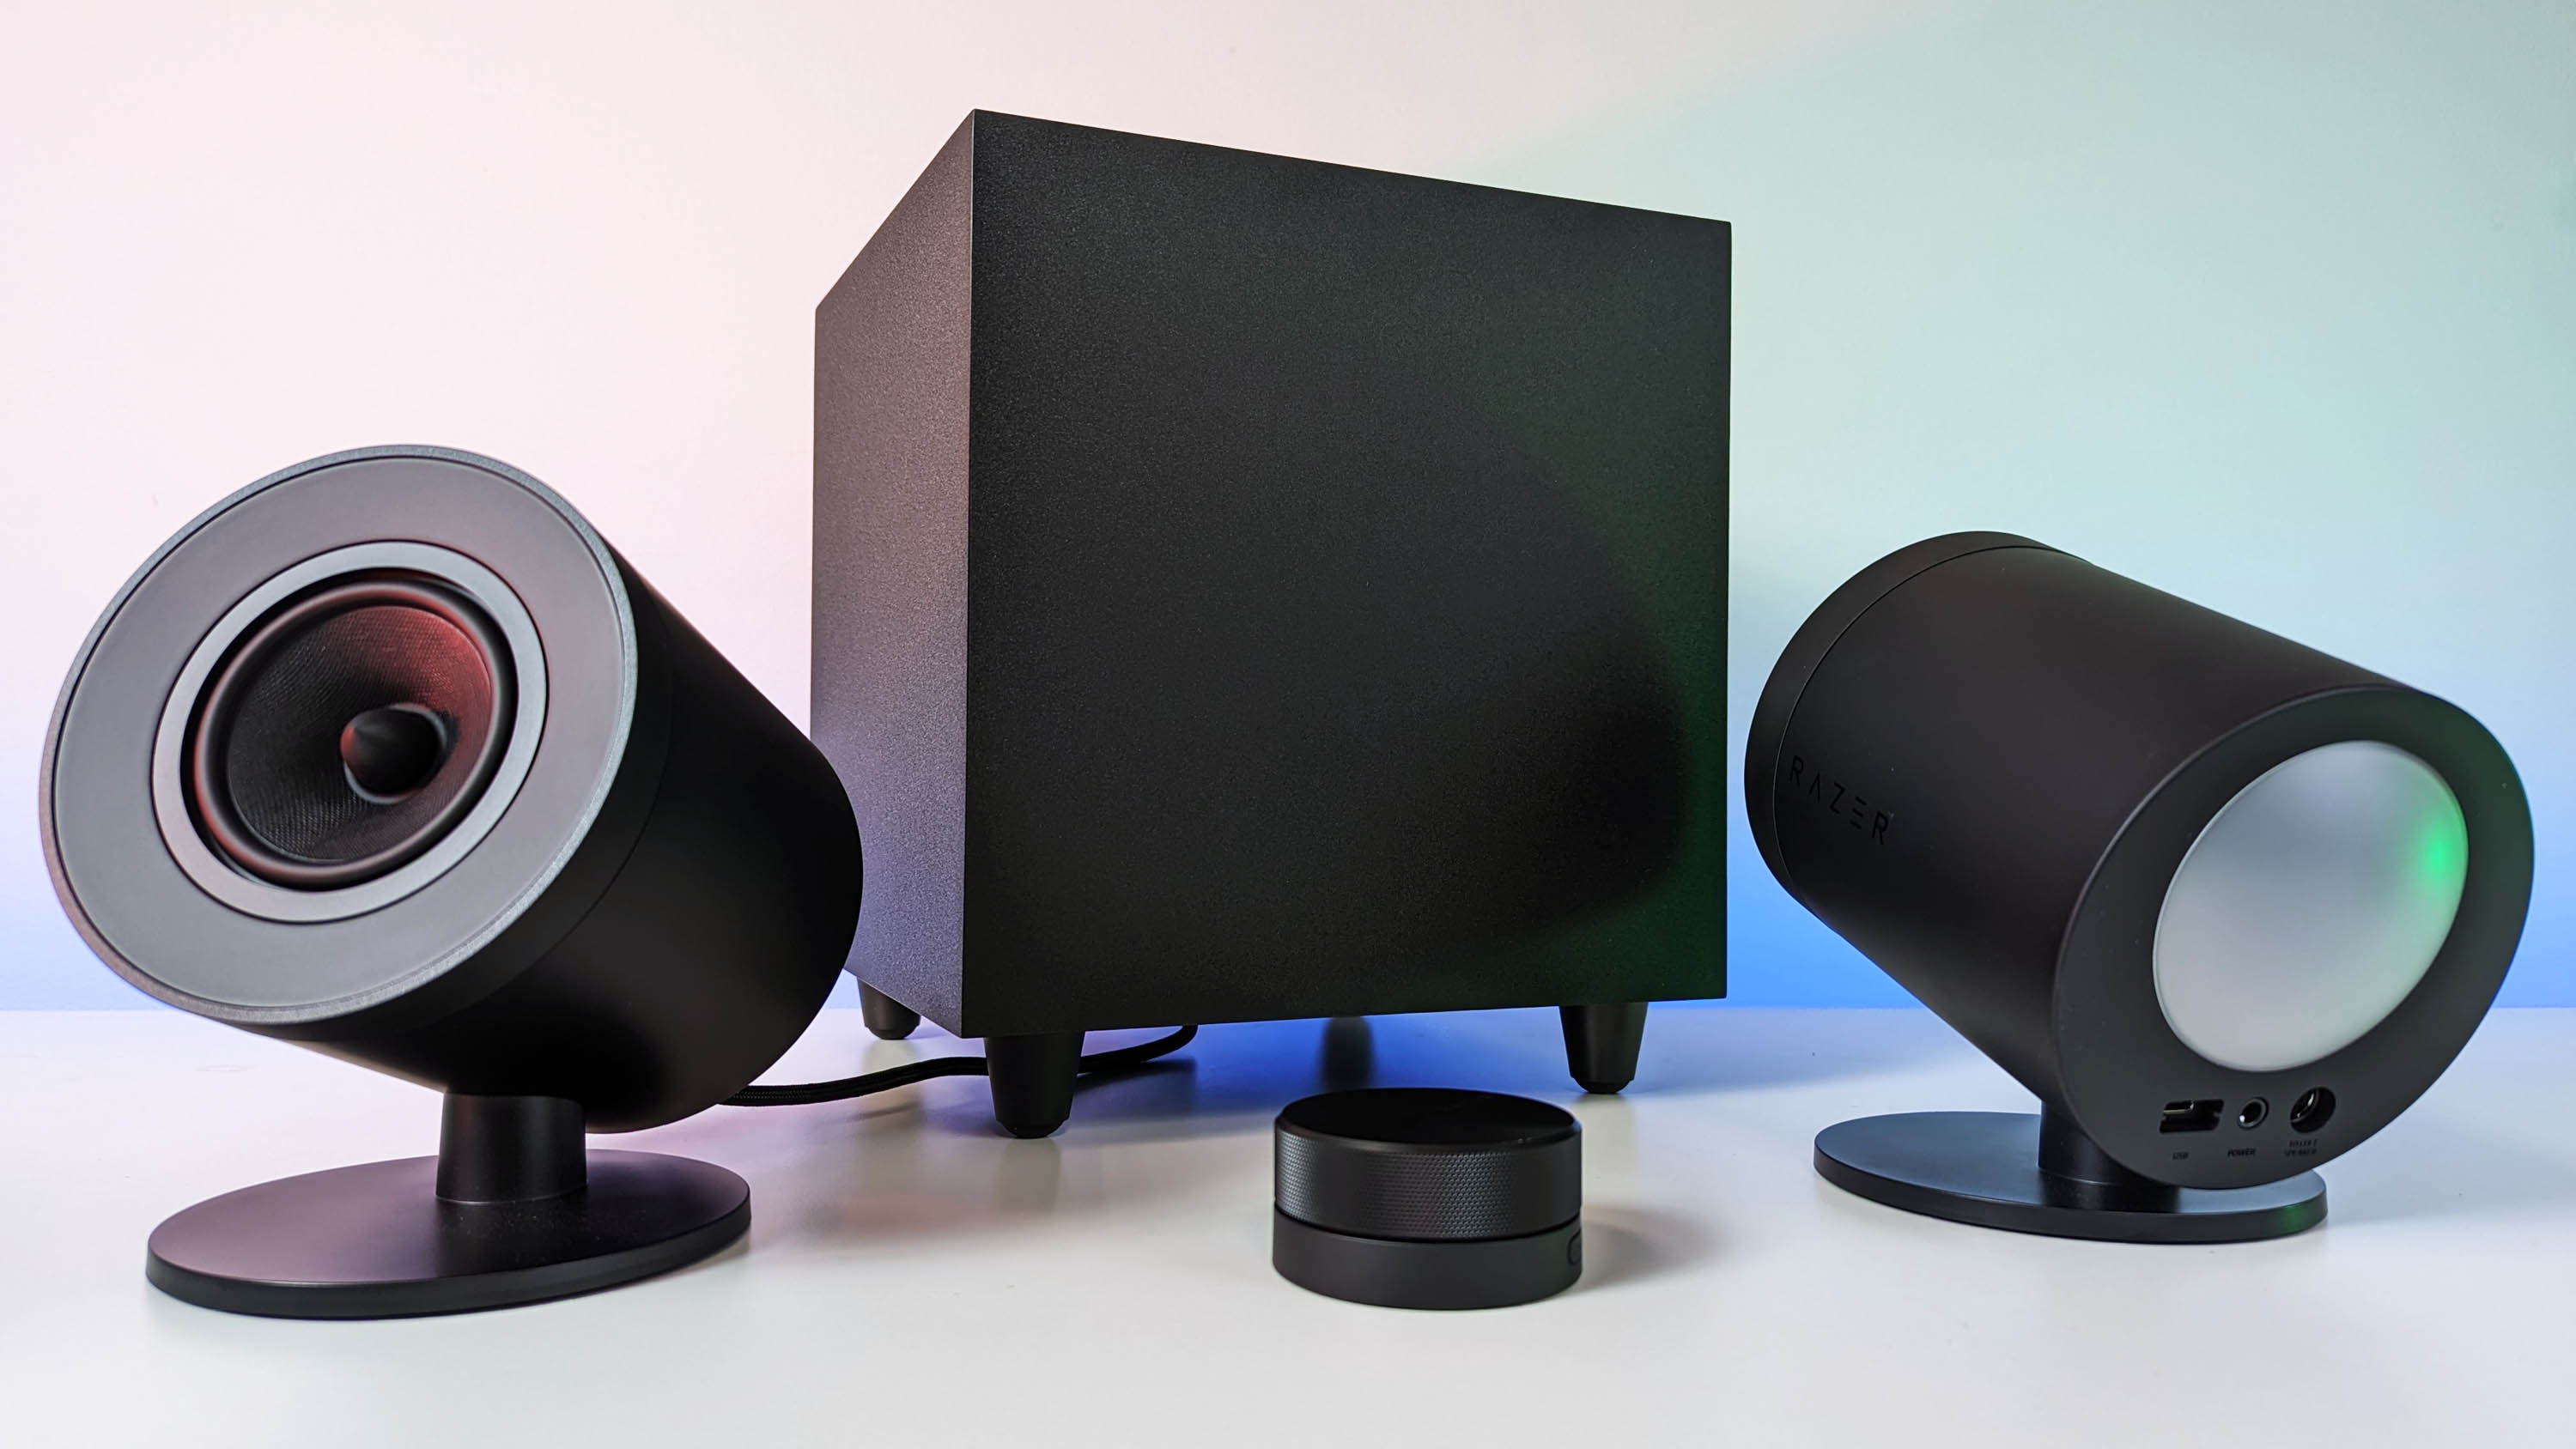 Razer Nommo V2 Pro PC gaming speakers, software, and components